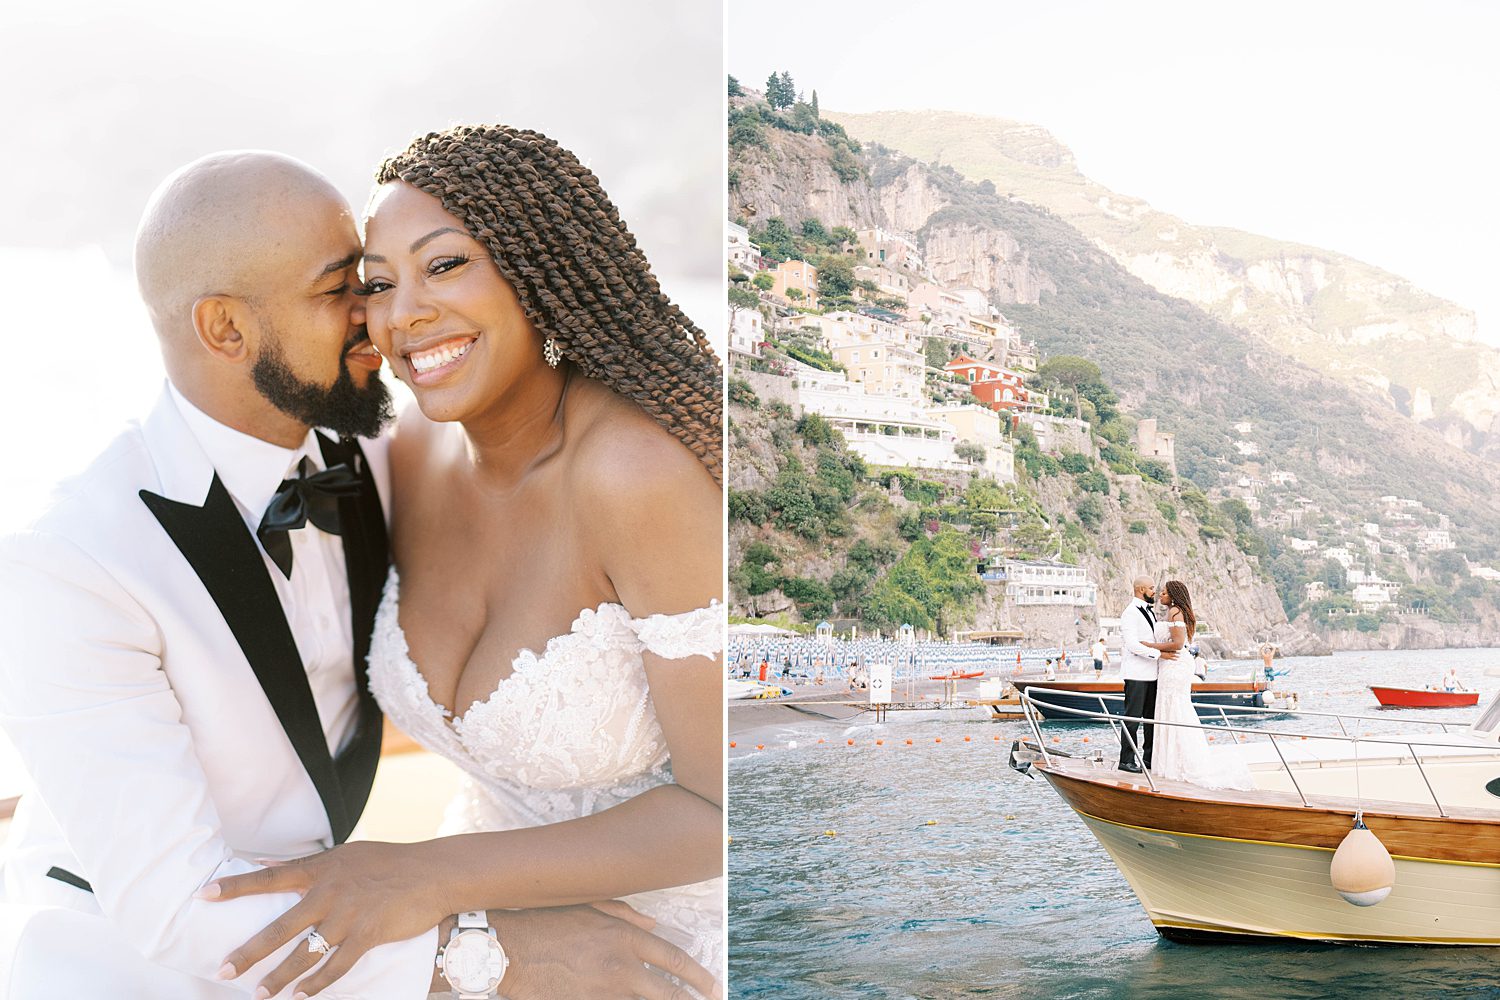 Florence Italy wedding photographer shares how to make the most out of your destination wedding in Italy